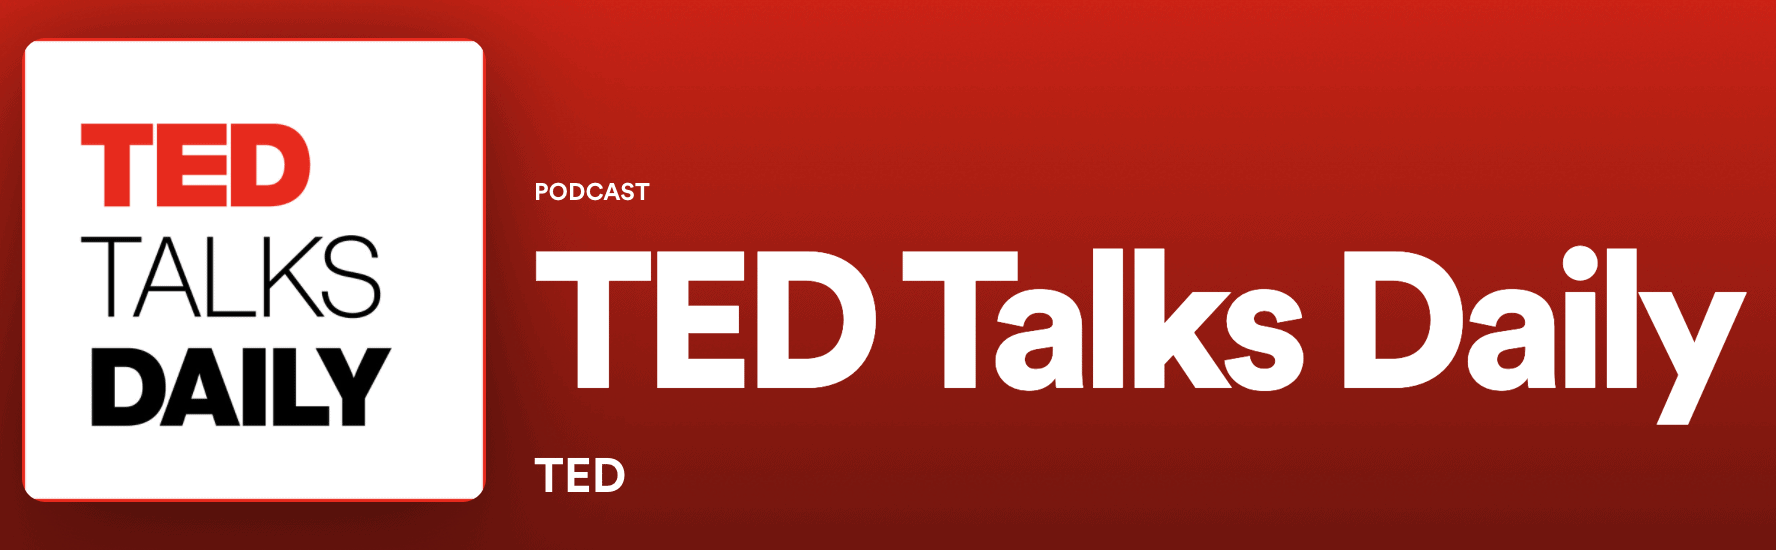 Ted Talks Daily